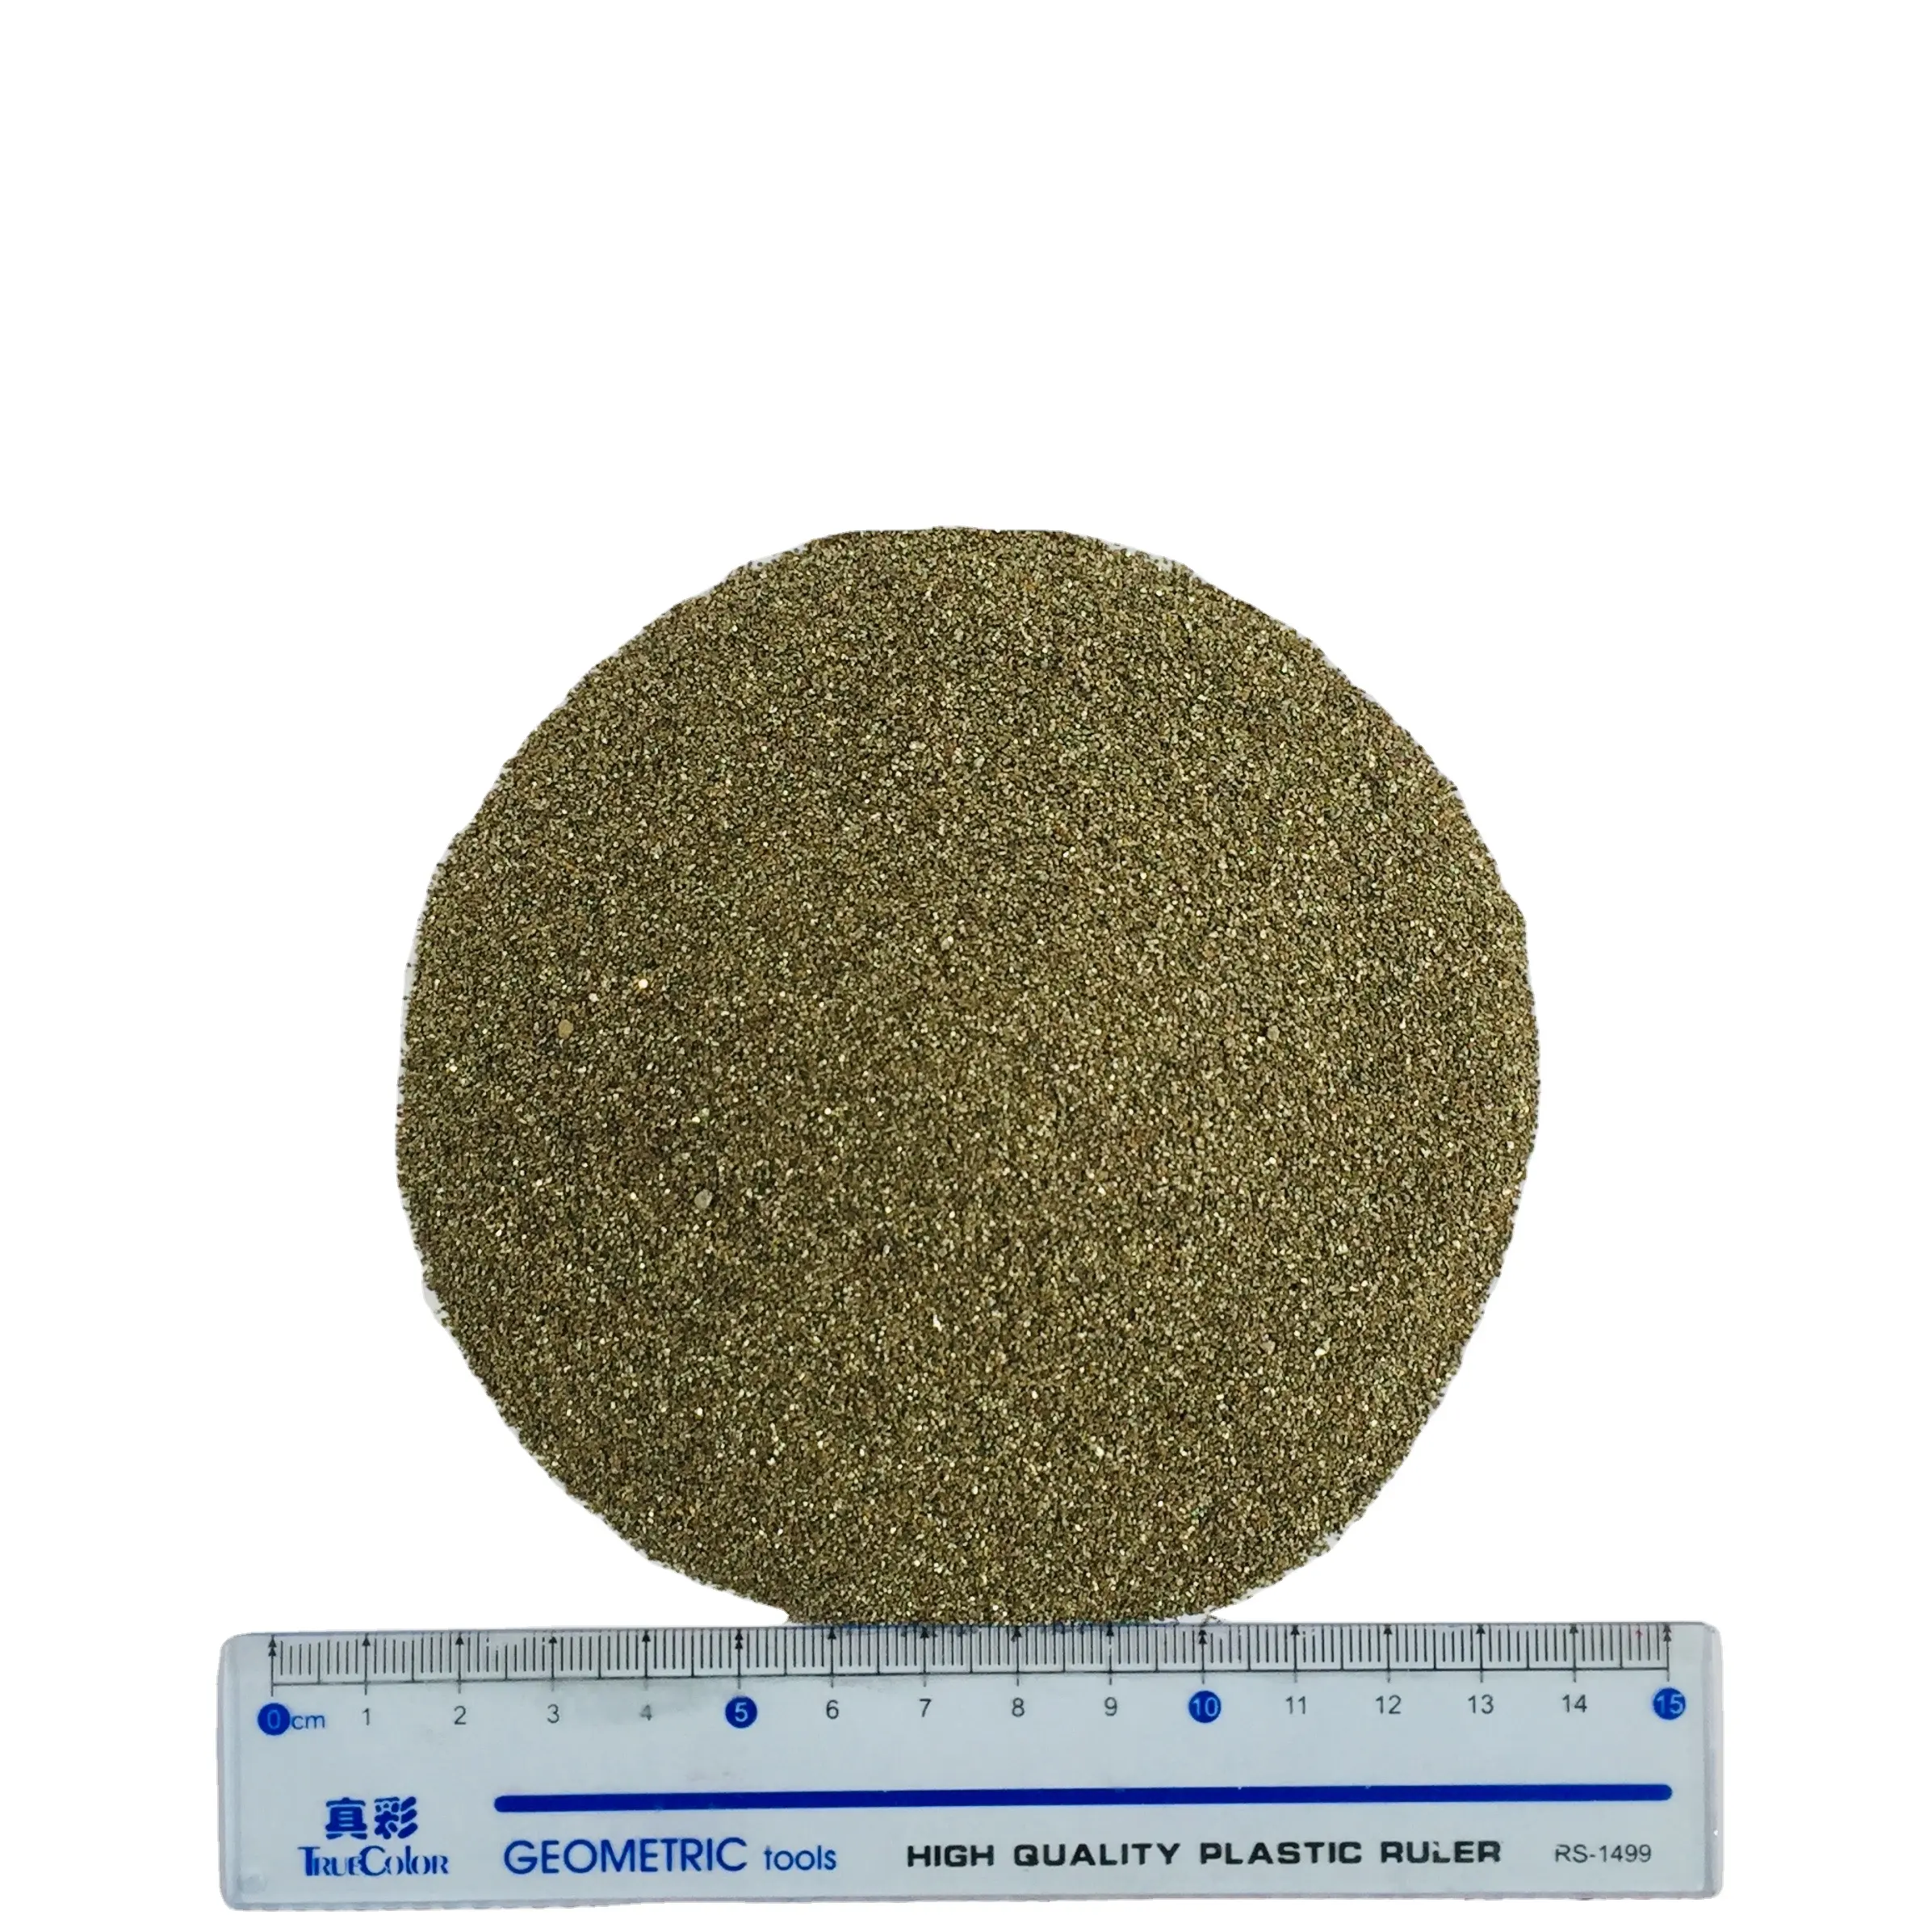 pyrite for making Resin-bonded grinding wheels and The Brake lining